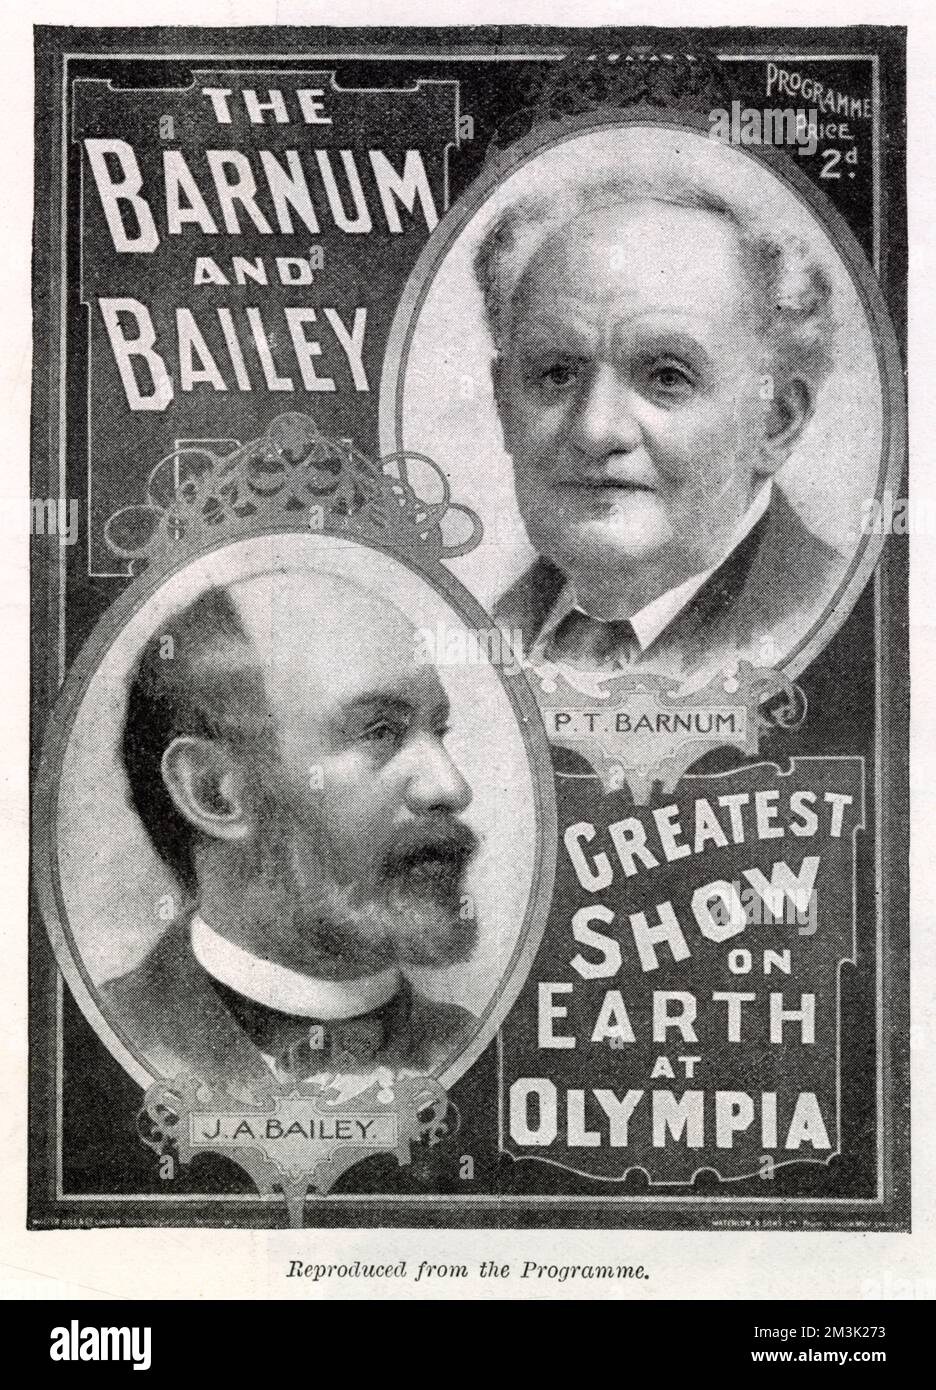 Front cover of the Barnum and Bailey Show programme for the 1897 performances at Olympia, London. Stock Photo